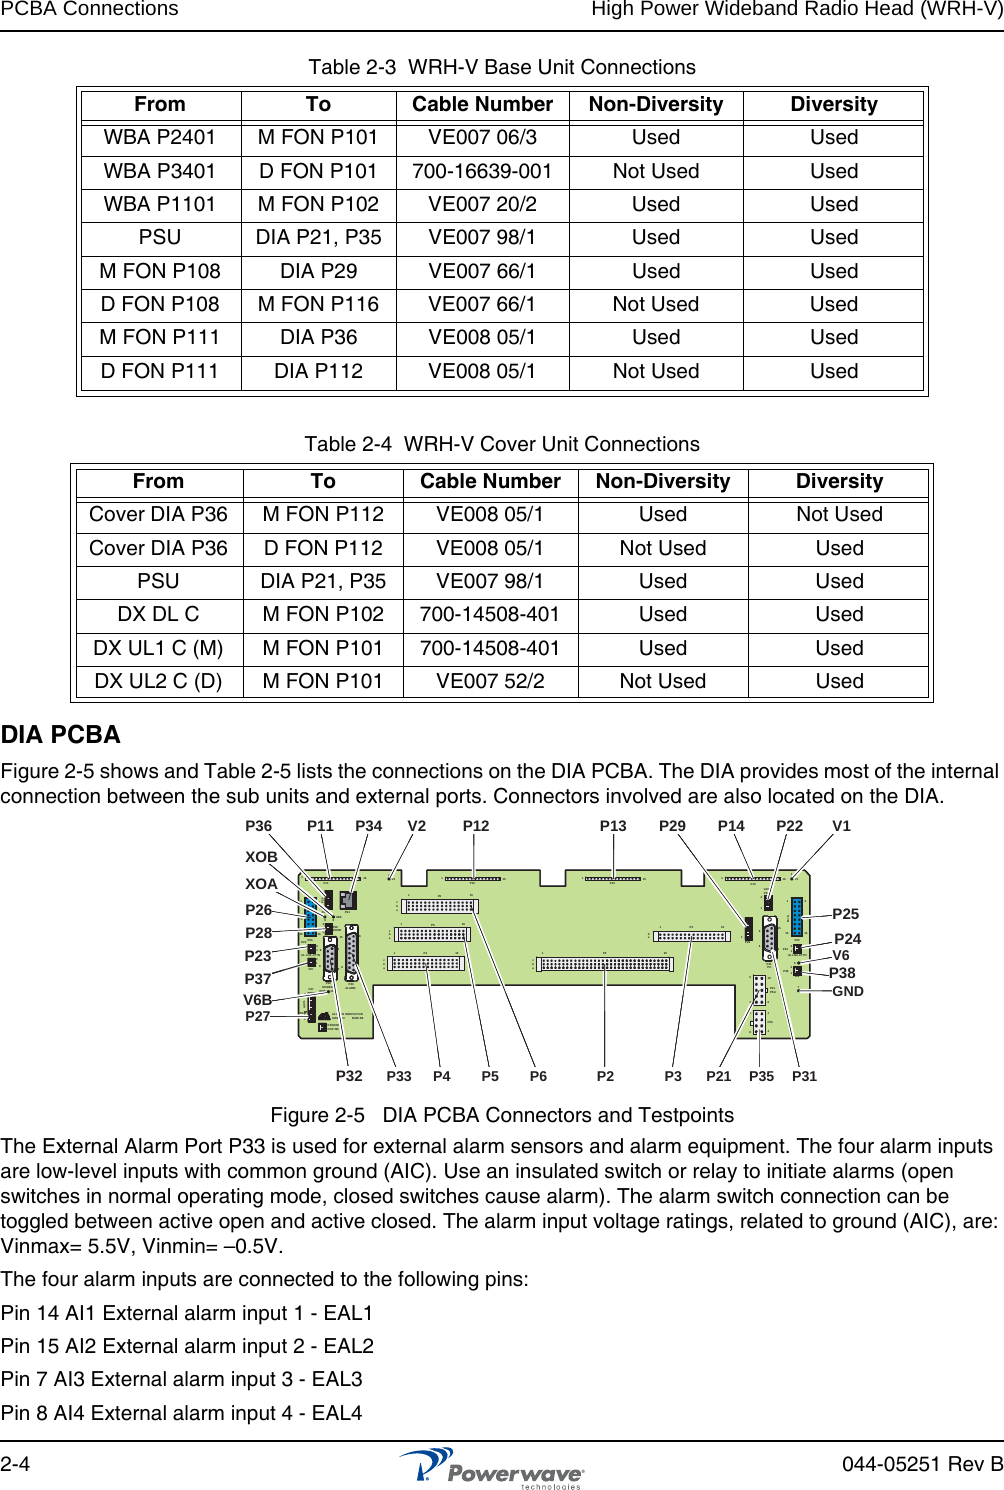 PCBA Connections High Power Wideband Radio Head (WRH-V)2-4 044-05251 Rev BTable 2-3  WRH-V Base Unit ConnectionsTable 2-4  WRH-V Cover Unit ConnectionsDIA PCBAFigure 2-5 shows and Table 2-5 lists the connections on the DIA PCBA. The DIA provides most of the internal connection between the sub units and external ports. Connectors involved are also located on the DIA. Figure 2-5   DIA PCBA Connectors and TestpointsThe External Alarm Port P33 is used for external alarm sensors and alarm equipment. The four alarm inputs are low-level inputs with common ground (AIC). Use an insulated switch or relay to initiate alarms (open switches in normal operating mode, closed switches cause alarm). The alarm switch connection can be toggled between active open and active closed. The alarm input voltage ratings, related to ground (AIC), are: Vinmax= 5.5V, Vinmin= –0.5V.The four alarm inputs are connected to the following pins:Pin 14 AI1 External alarm input 1 - EAL1Pin 15 AI2 External alarm input 2 - EAL2Pin 7 AI3 External alarm input 3 - EAL3Pin 8 AI4 External alarm input 4 - EAL4From To Cable Number Non-Diversity DiversityWBA P2401 M FON P101 VE007 06/3 Used UsedWBA P3401 D FON P101 700-16639-001 Not Used UsedWBA P1101 M FON P102 VE007 20/2 Used UsedPSU DIA P21, P35 VE007 98/1 Used UsedM FON P108 DIA P29 VE007 66/1 Used UsedD FON P108 M FON P116 VE007 66/1 Not Used UsedM FON P111 DIA P36 VE008 05/1 Used UsedD FON P111 DIA P112 VE008 05/1 Not Used UsedFrom To Cable Number Non-Diversity DiversityCover DIA P36 M FON P112 VE008 05/1 Used Not UsedCover DIA P36 D FON P112 VE008 05/1 Not Used UsedPSU DIA P21, P35 VE007 98/1 Used UsedDX DL C M FON P102 700-14508-401 Used UsedDX UL1 C (M) M FON P101 700-14508-401 Used UsedDX UL2 C (D) M FON P101 VE007 52/2 Not Used UsedALLGON INNO VATIONSWEDEN         M105 R61PARKINGFOR W5W58P27 W6B 101P33ALARMP23UL LNA ATT NP32MODEMAUX1P28DOOR596111611M-&gt;SP11P348915P2615 16S-&gt;M12389P365X0AX0B2V2 116P12 P13111161616P4P5P6cbacbacbacba1P2321ba116P316 116P141V111111461156915216124585P35P21PSU610P31PCP29P24P25GND76V6UL LNA ATTNLEDP2212V6BP26XOAXOBP28P4 P5 P6 P2 P3 P31 P21  P35 P33P32P11 P12 P13 V1P14 P22P29P34 V2P36V6GNDP25P24P27P2312P37DIV 12P38DIVP38ALLGON INNO VATIONSWEDEN         M105 R61PARKINGFOR W5W58P27 W6B 101P33ALARMP23UL LNA ATT NP32MODEMAUX1P28DOOR596111611M-&gt;SP11P348915P2615 16S-&gt;M12389P365X0AX0B2V2 116P12 P13111161616P4P5P6cbacbacbacba1P2321ba116P316 116P141V111111461156915216124585P35P21PSU610P31PCP29P24P25GND76V6UL LNA ATTNLEDP2212V6BP26XOAXOBP28P4 P5 P6 P2 P3 P31 P21  P35 P33P32P11 P12 P13 V1P14 P22P29P34 V2P36V6GNDP25P24P27P2312P37DIV 12P38DIVP38